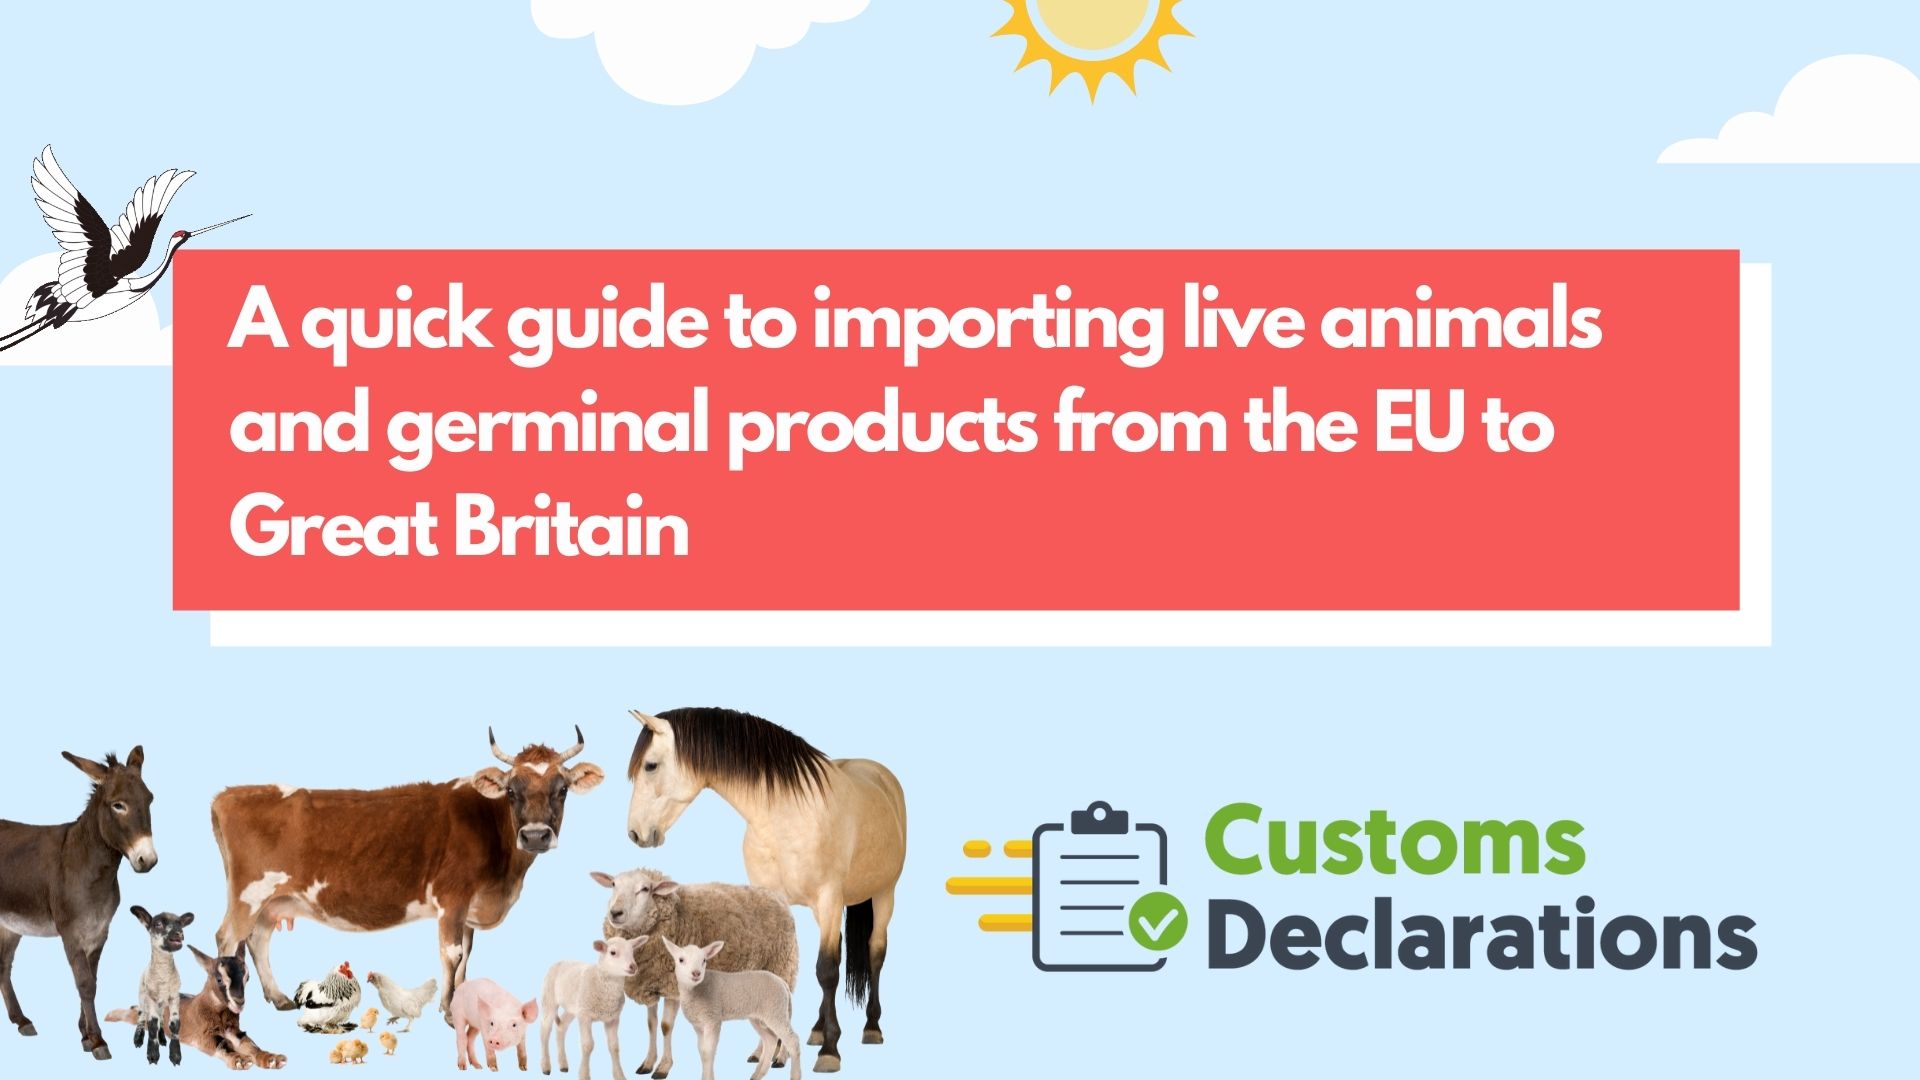 A quick guide to importing live animals and germinal products from the EU to Great Britain